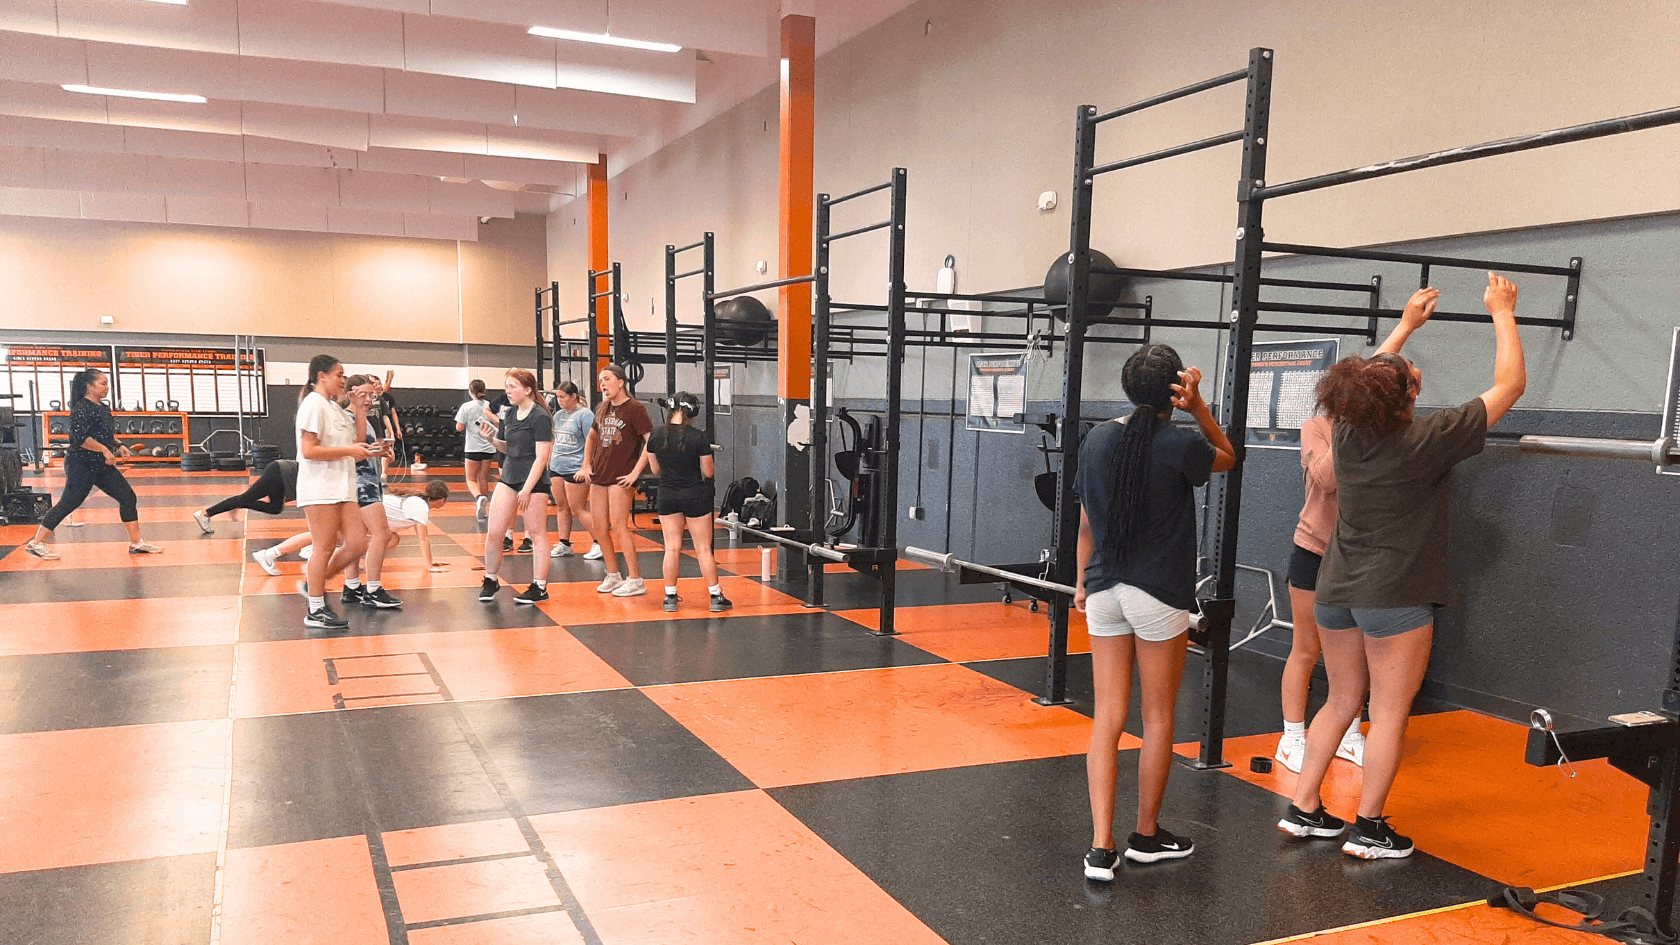 Students work out in the Waynesville High School weight room.